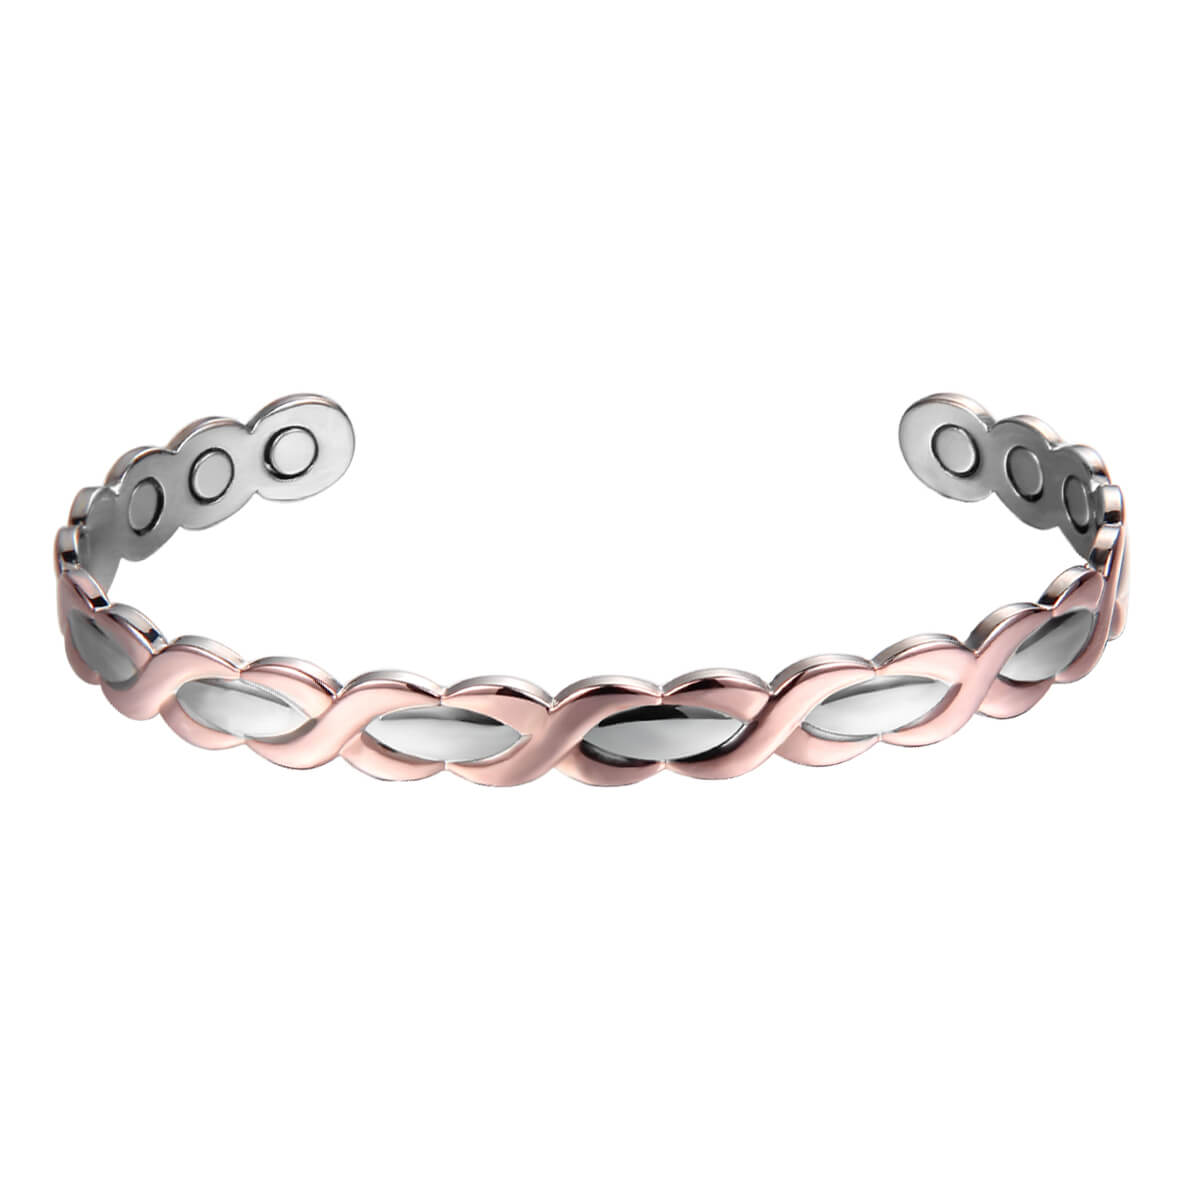 61. The Jace - Silver and Copper twist Copper Band (NEW)